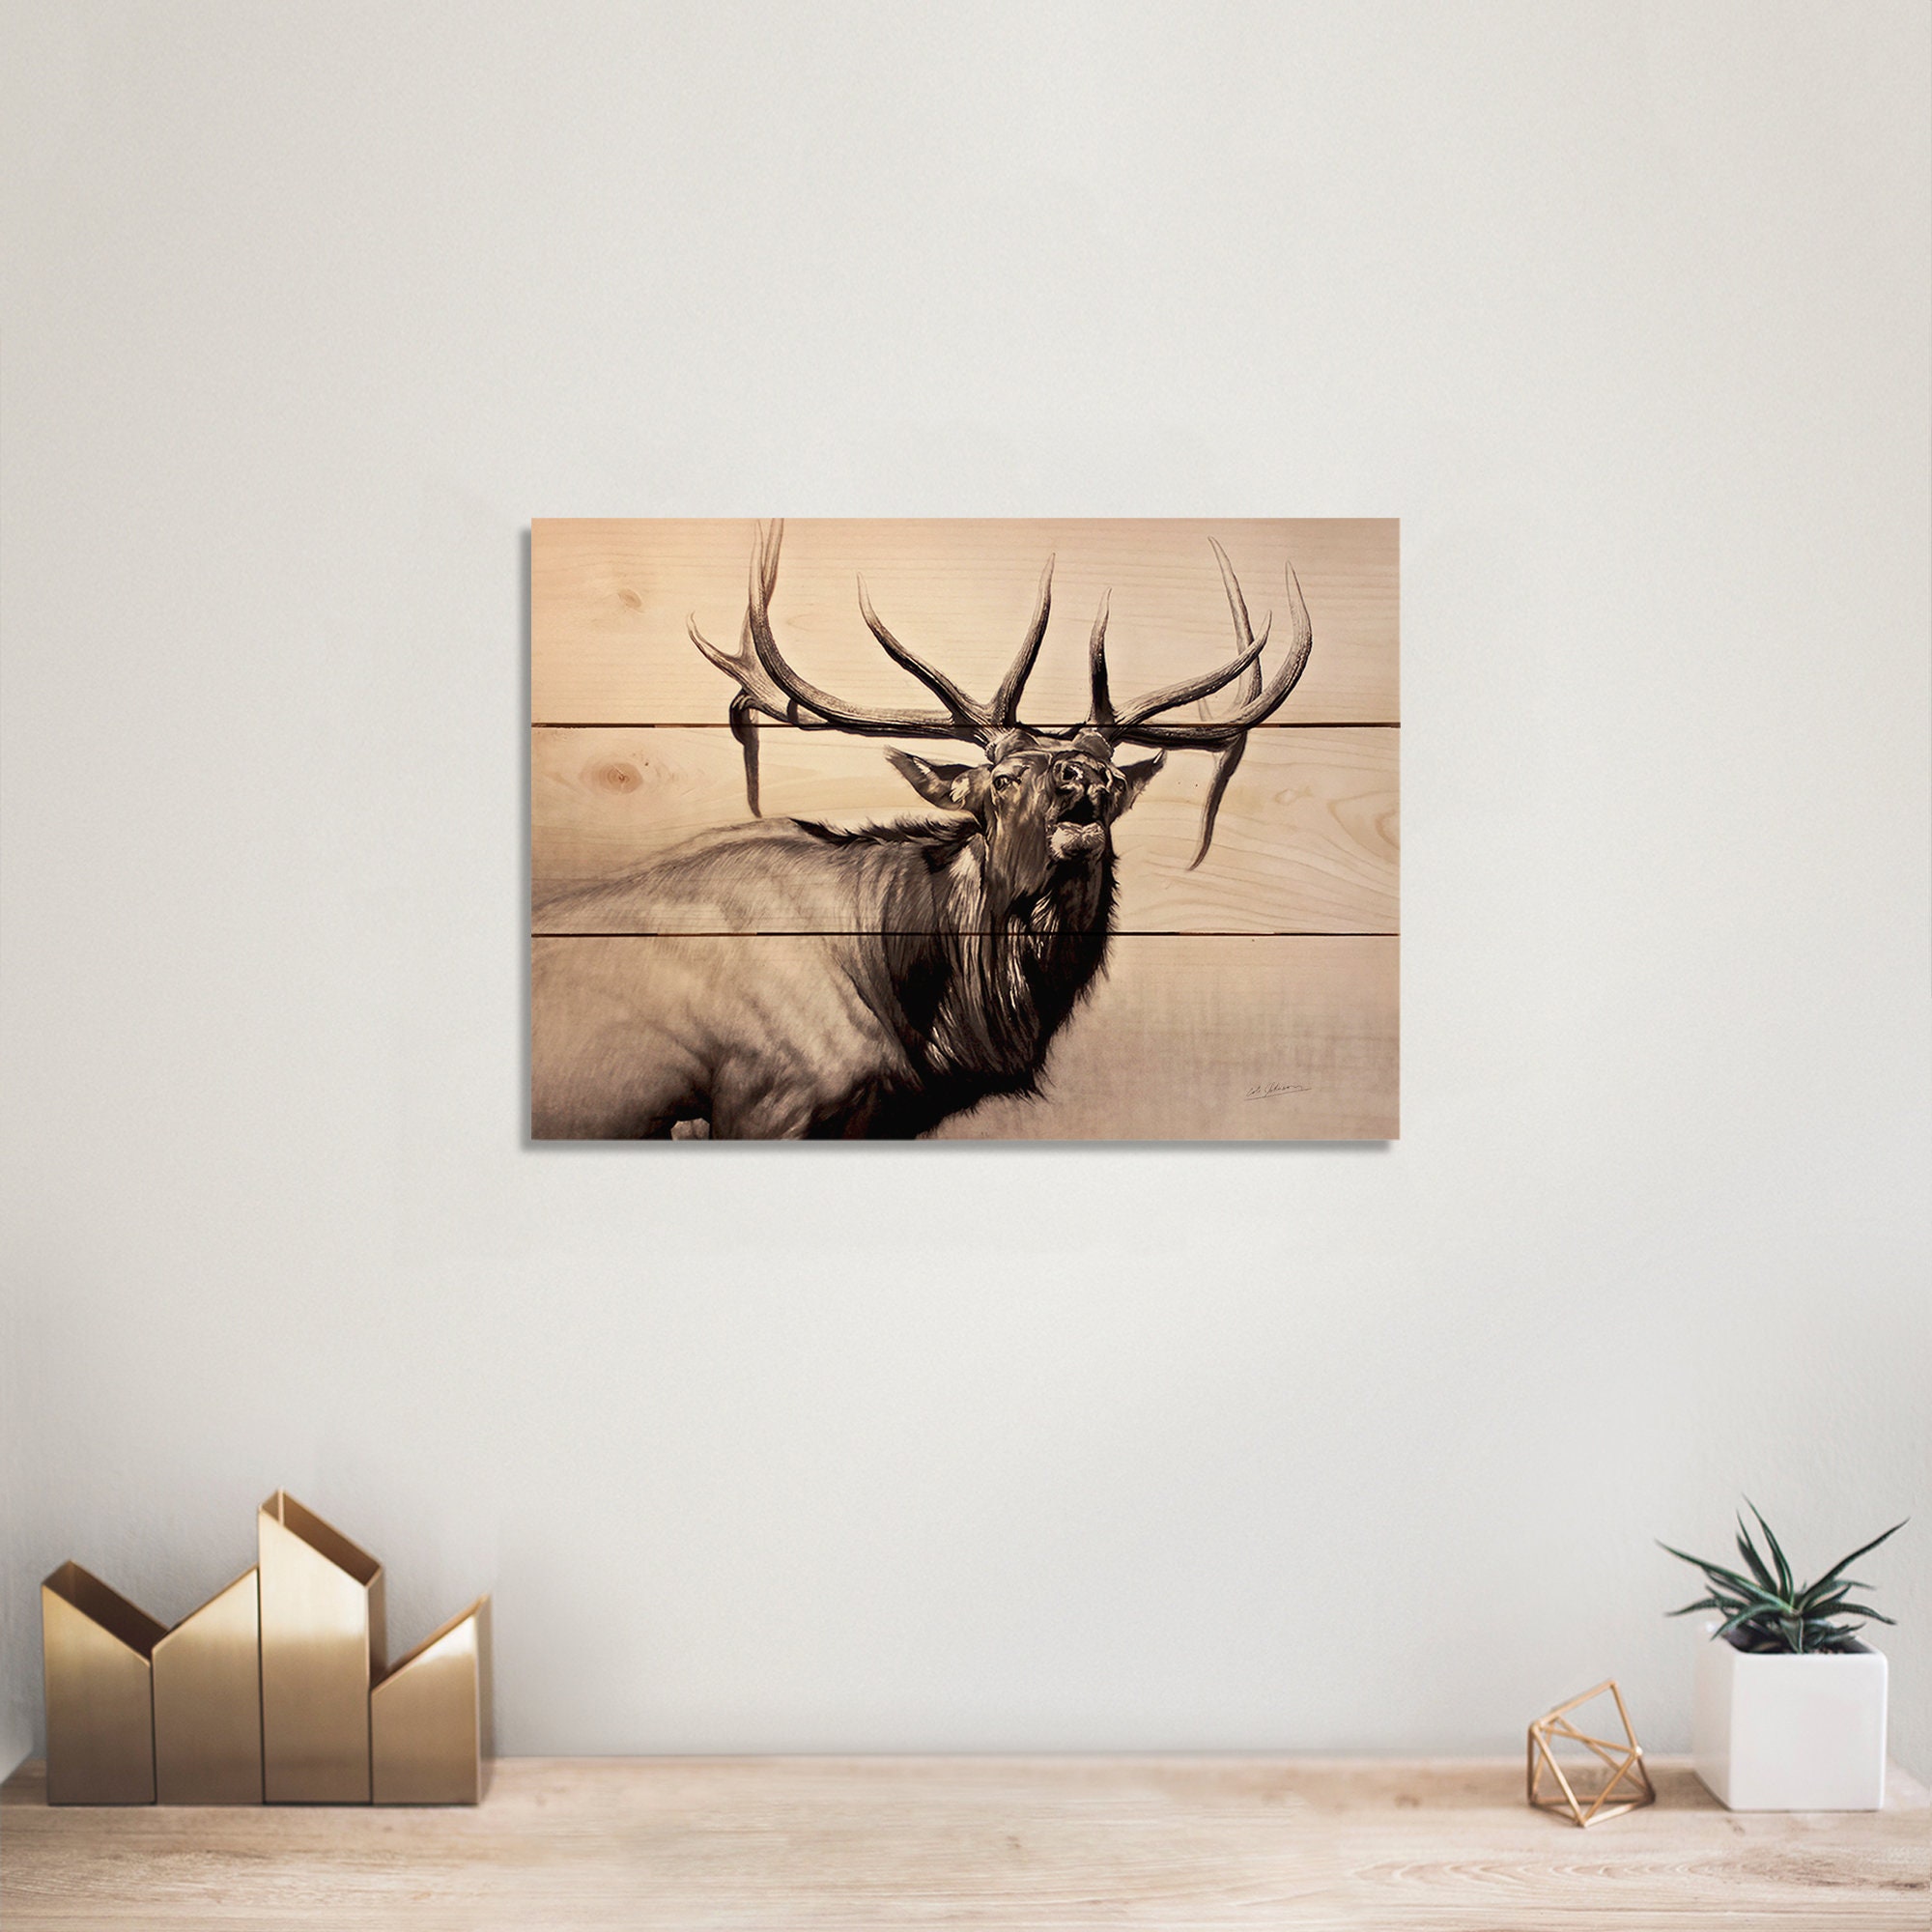 Herd Bull Charcoal Drawing Print on Wood Pallet Indoor & - Etsy